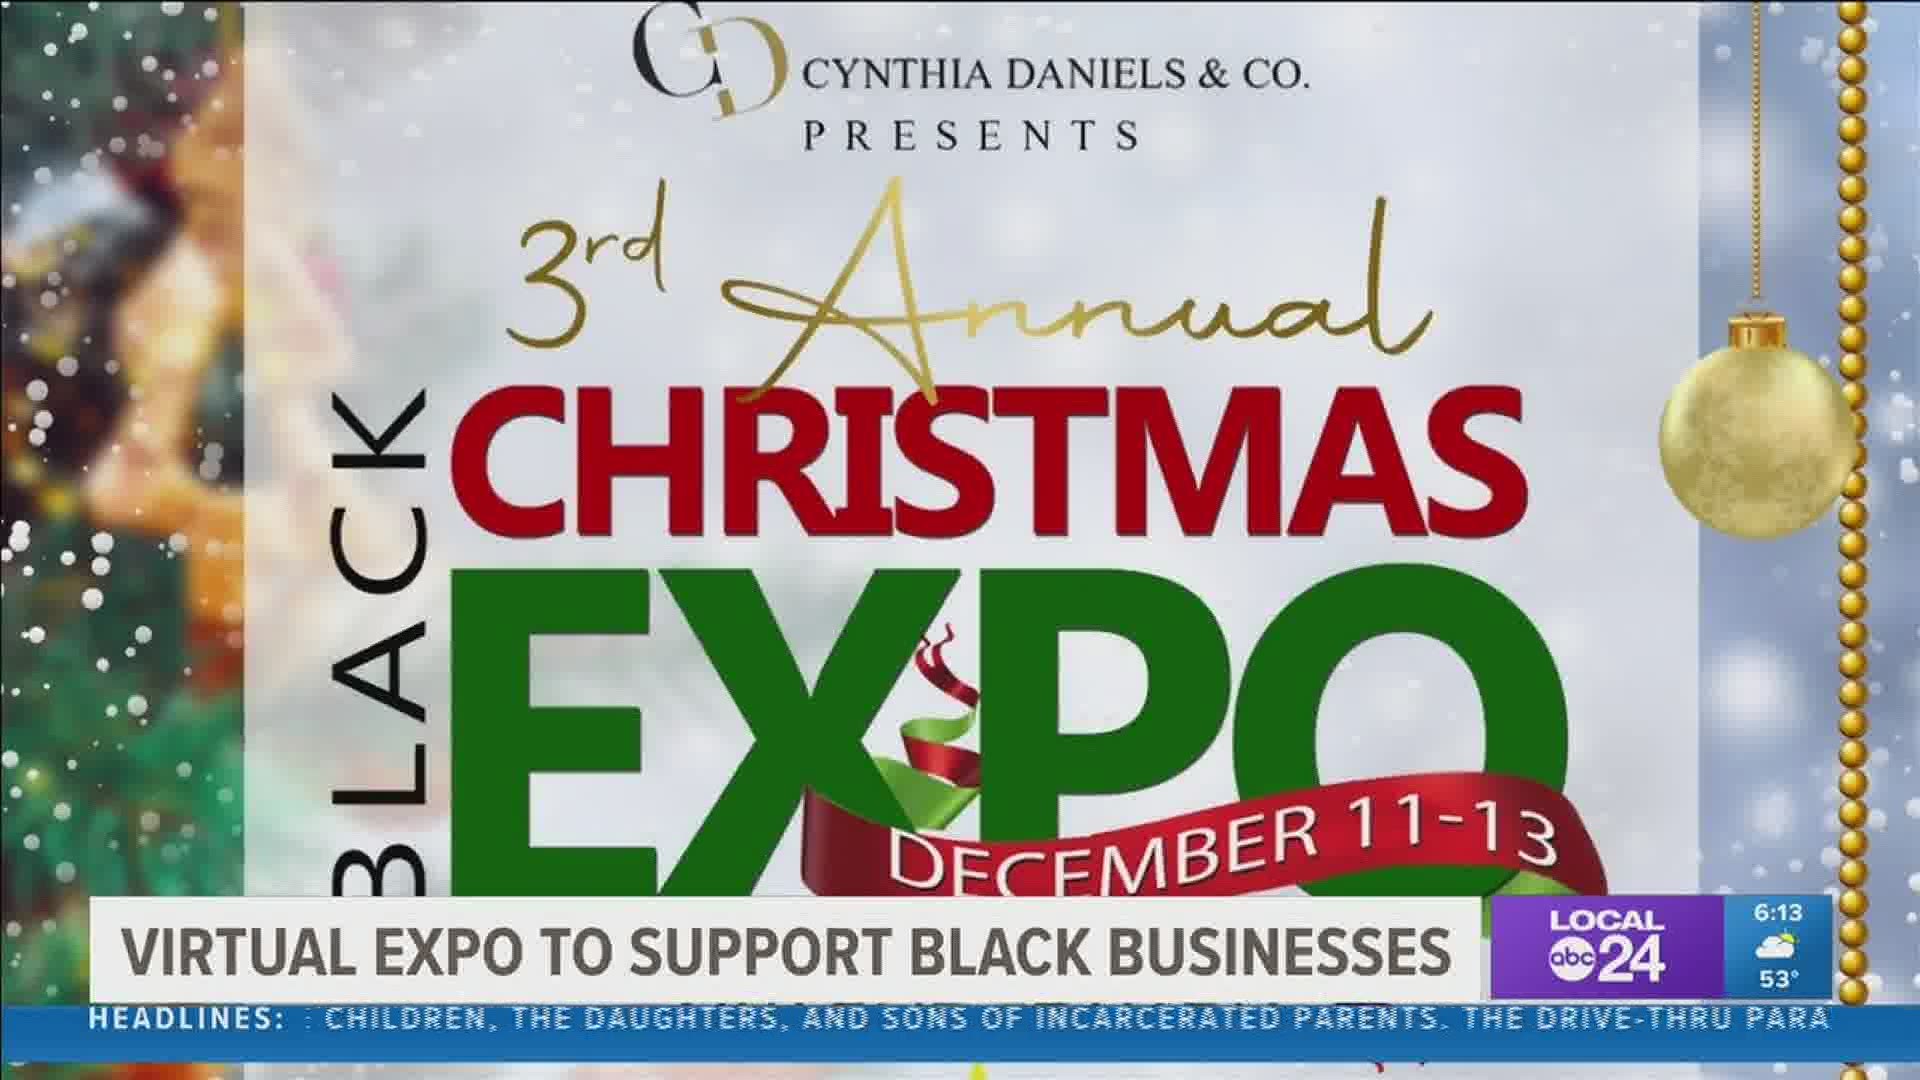 "Black Christmas Expo is a three-day weekend where you get to support and shop with 100 black businesses from the comfort of your own home," said Cynthia Daniels.